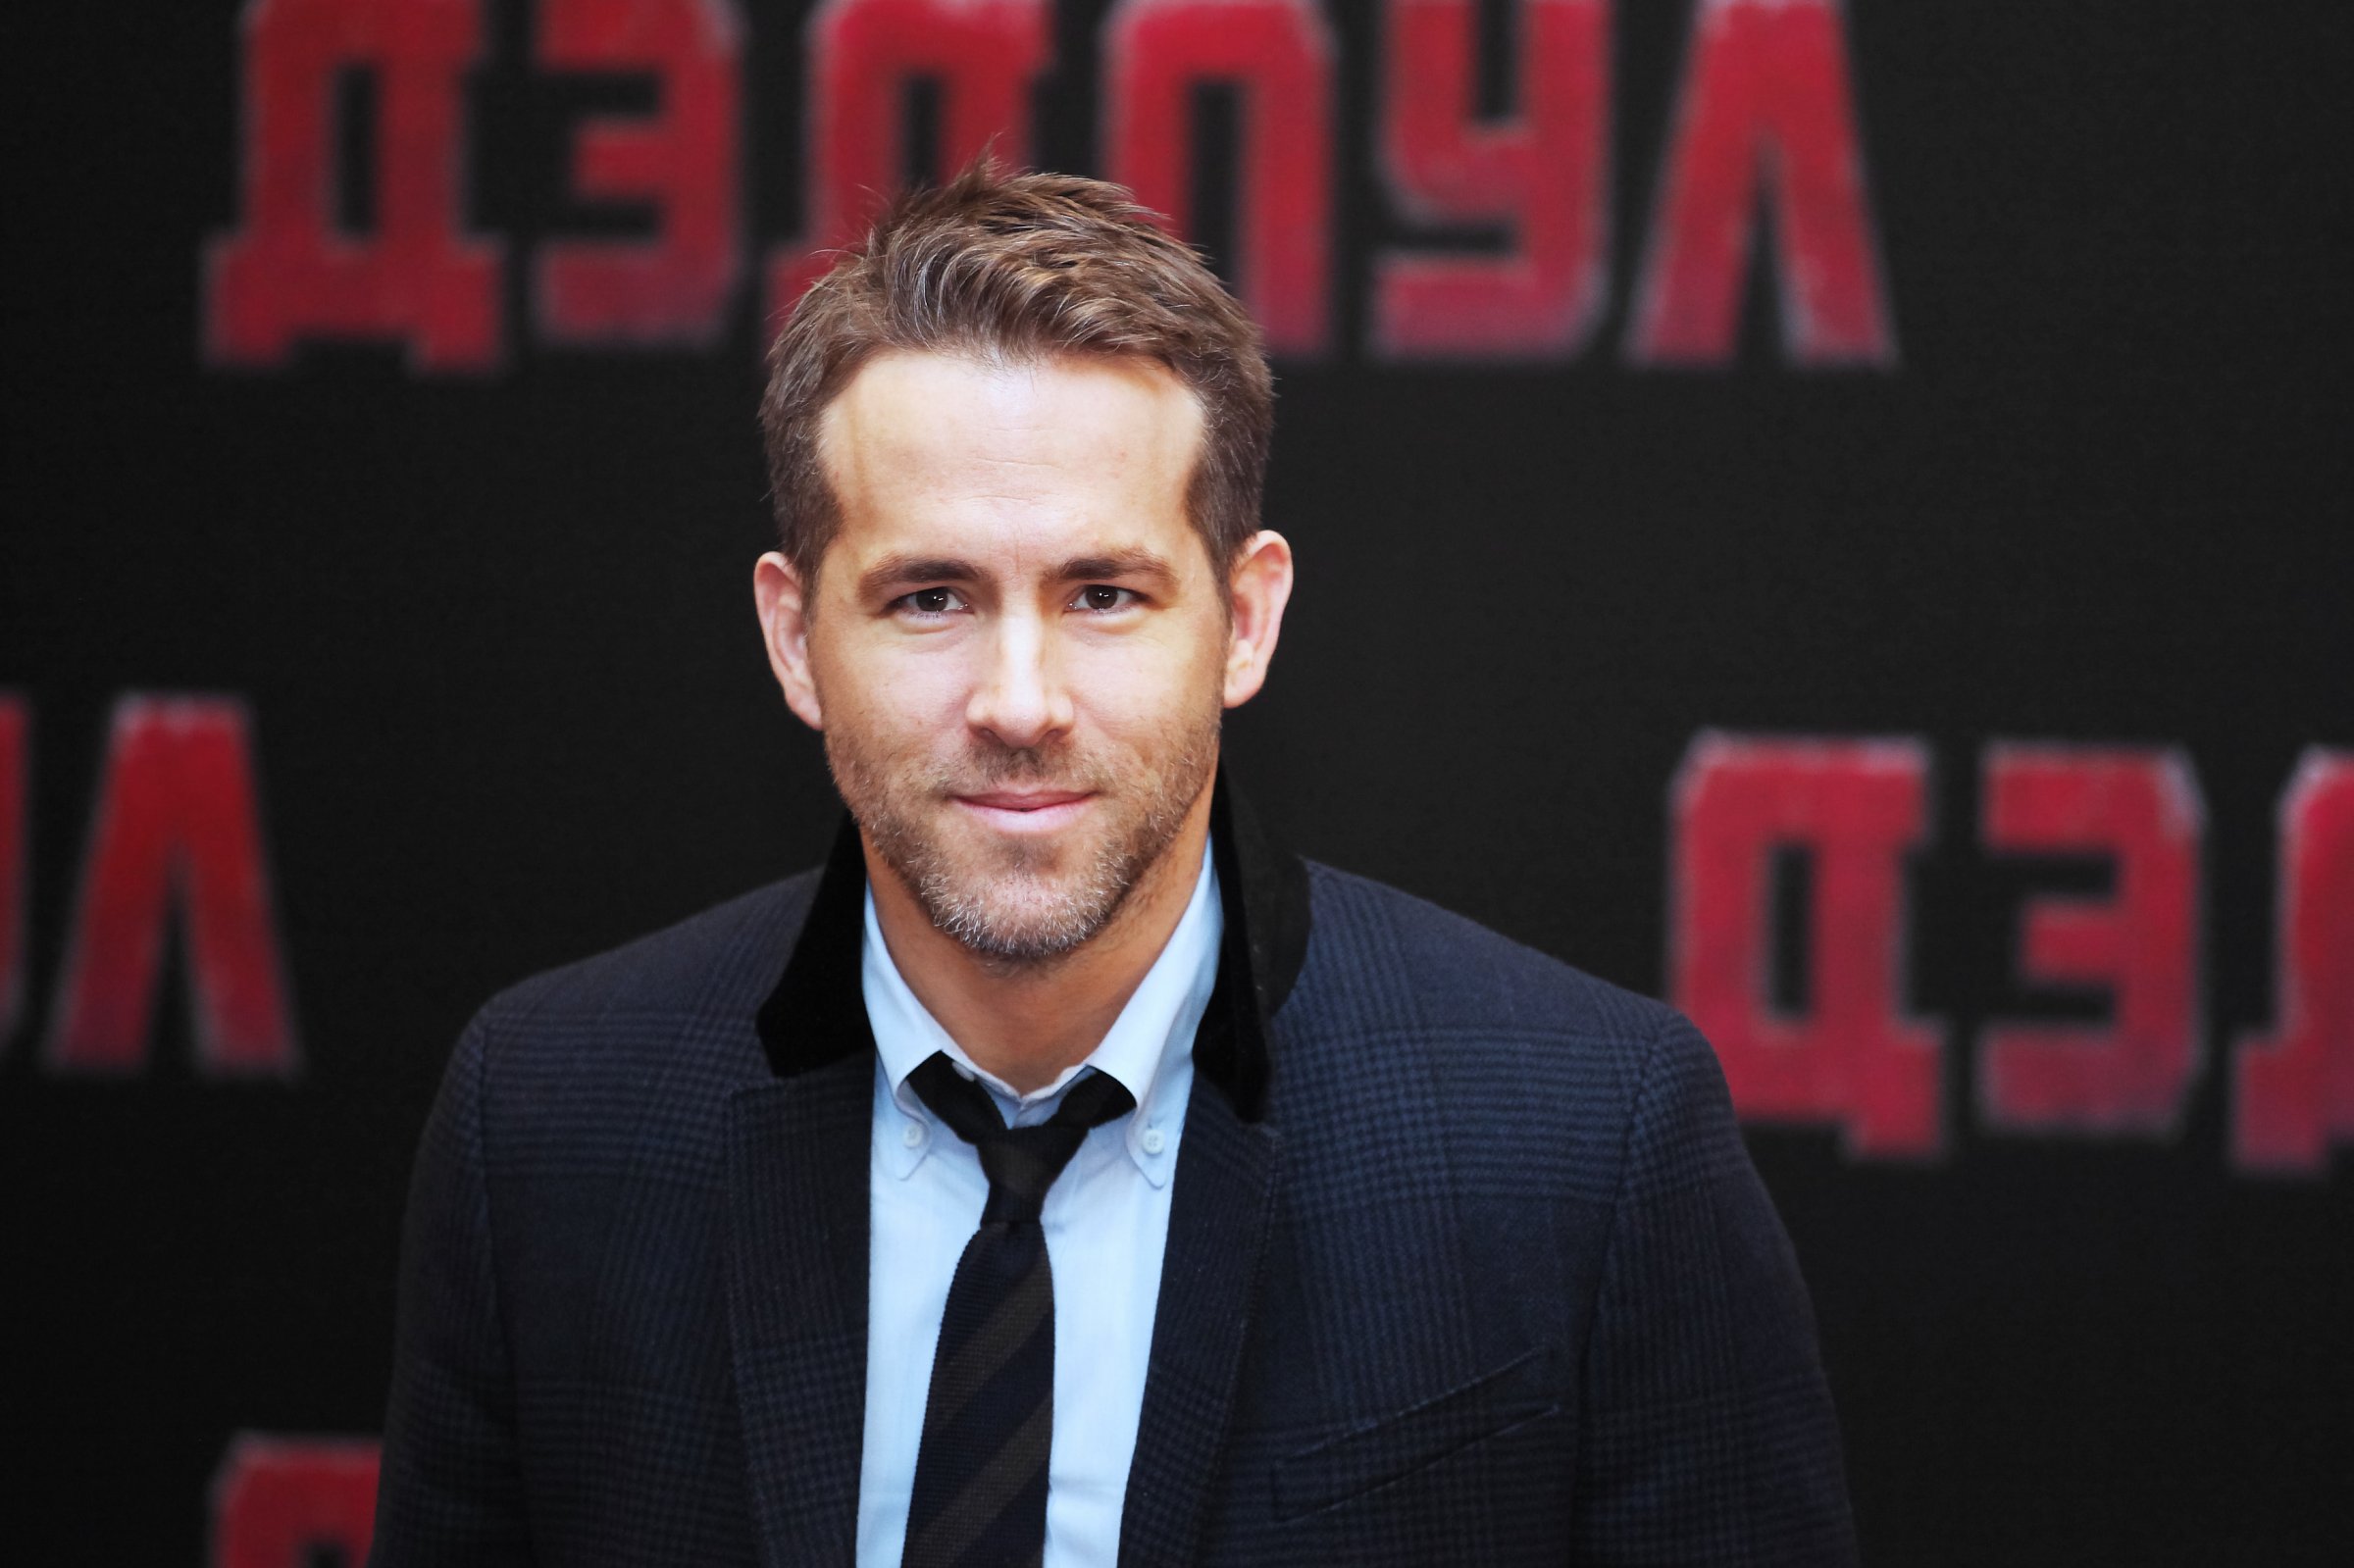 Ryan Reynolds attends a photocall for 'Deadpool' at the Ritz Carlton Hotel on January 25, 2016 in Moscow, Russia.